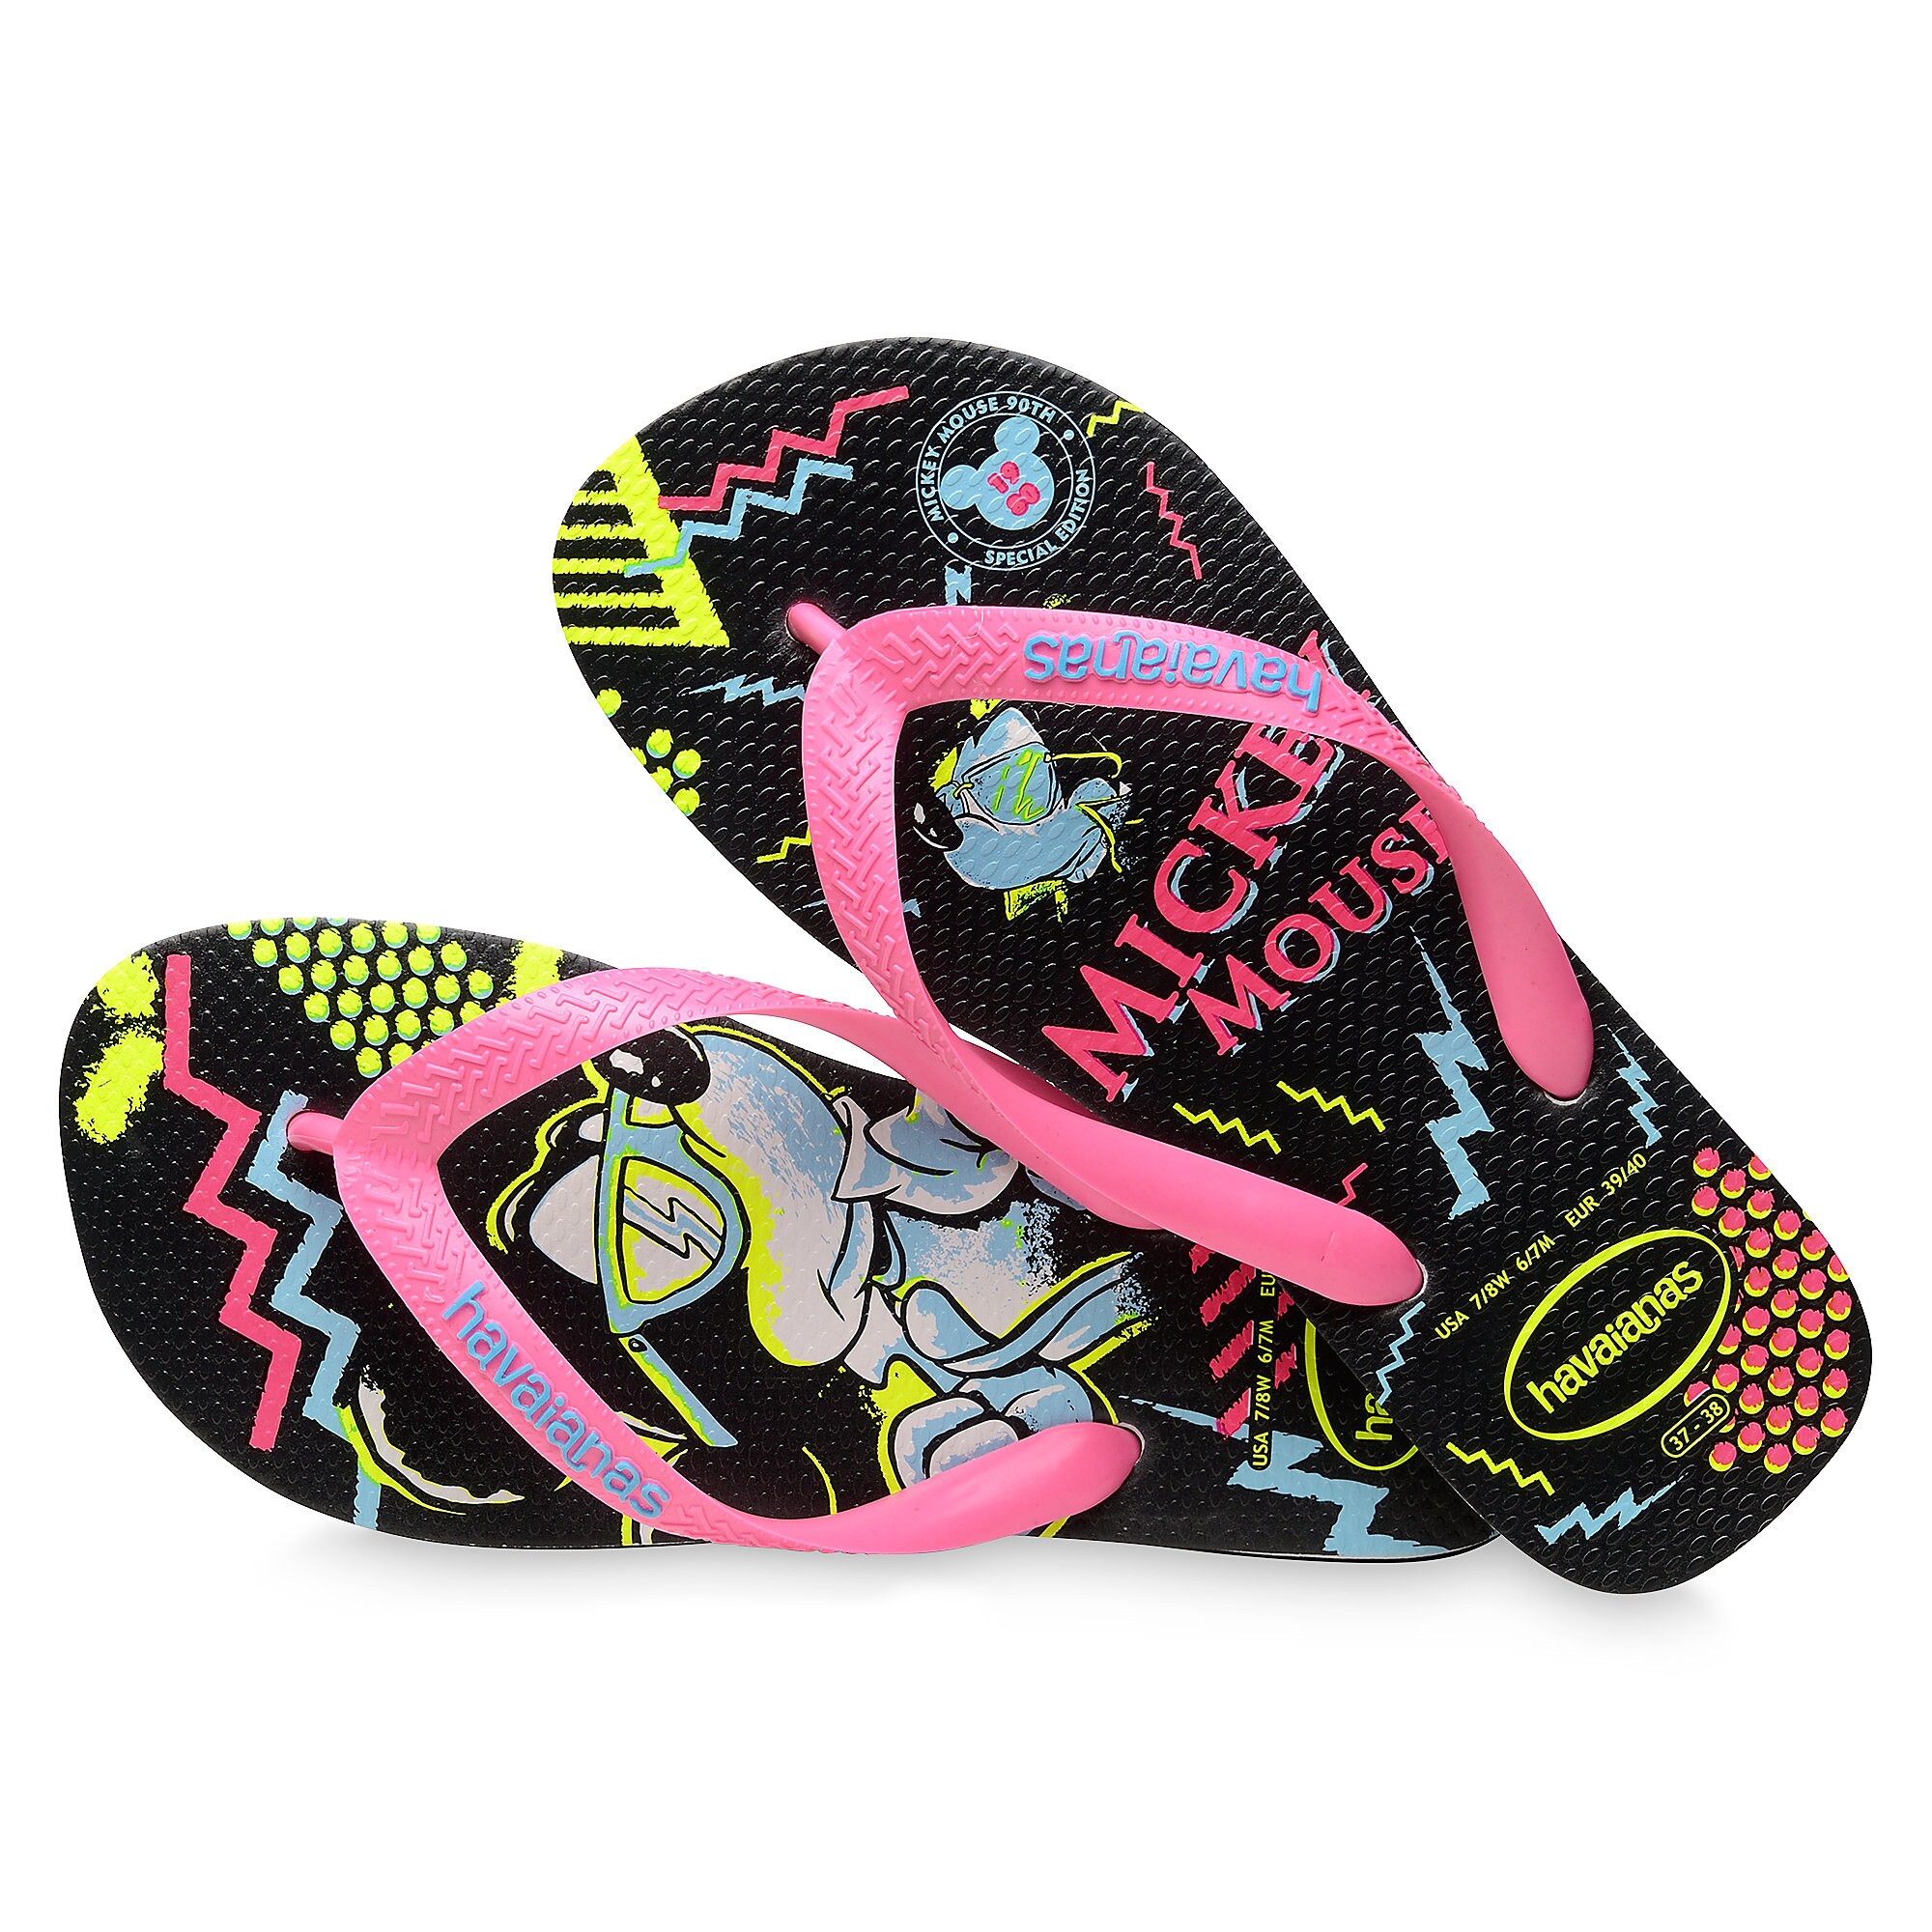  Mickey  Mouse  Neon Flip Flops  for Adults by Havaianas  